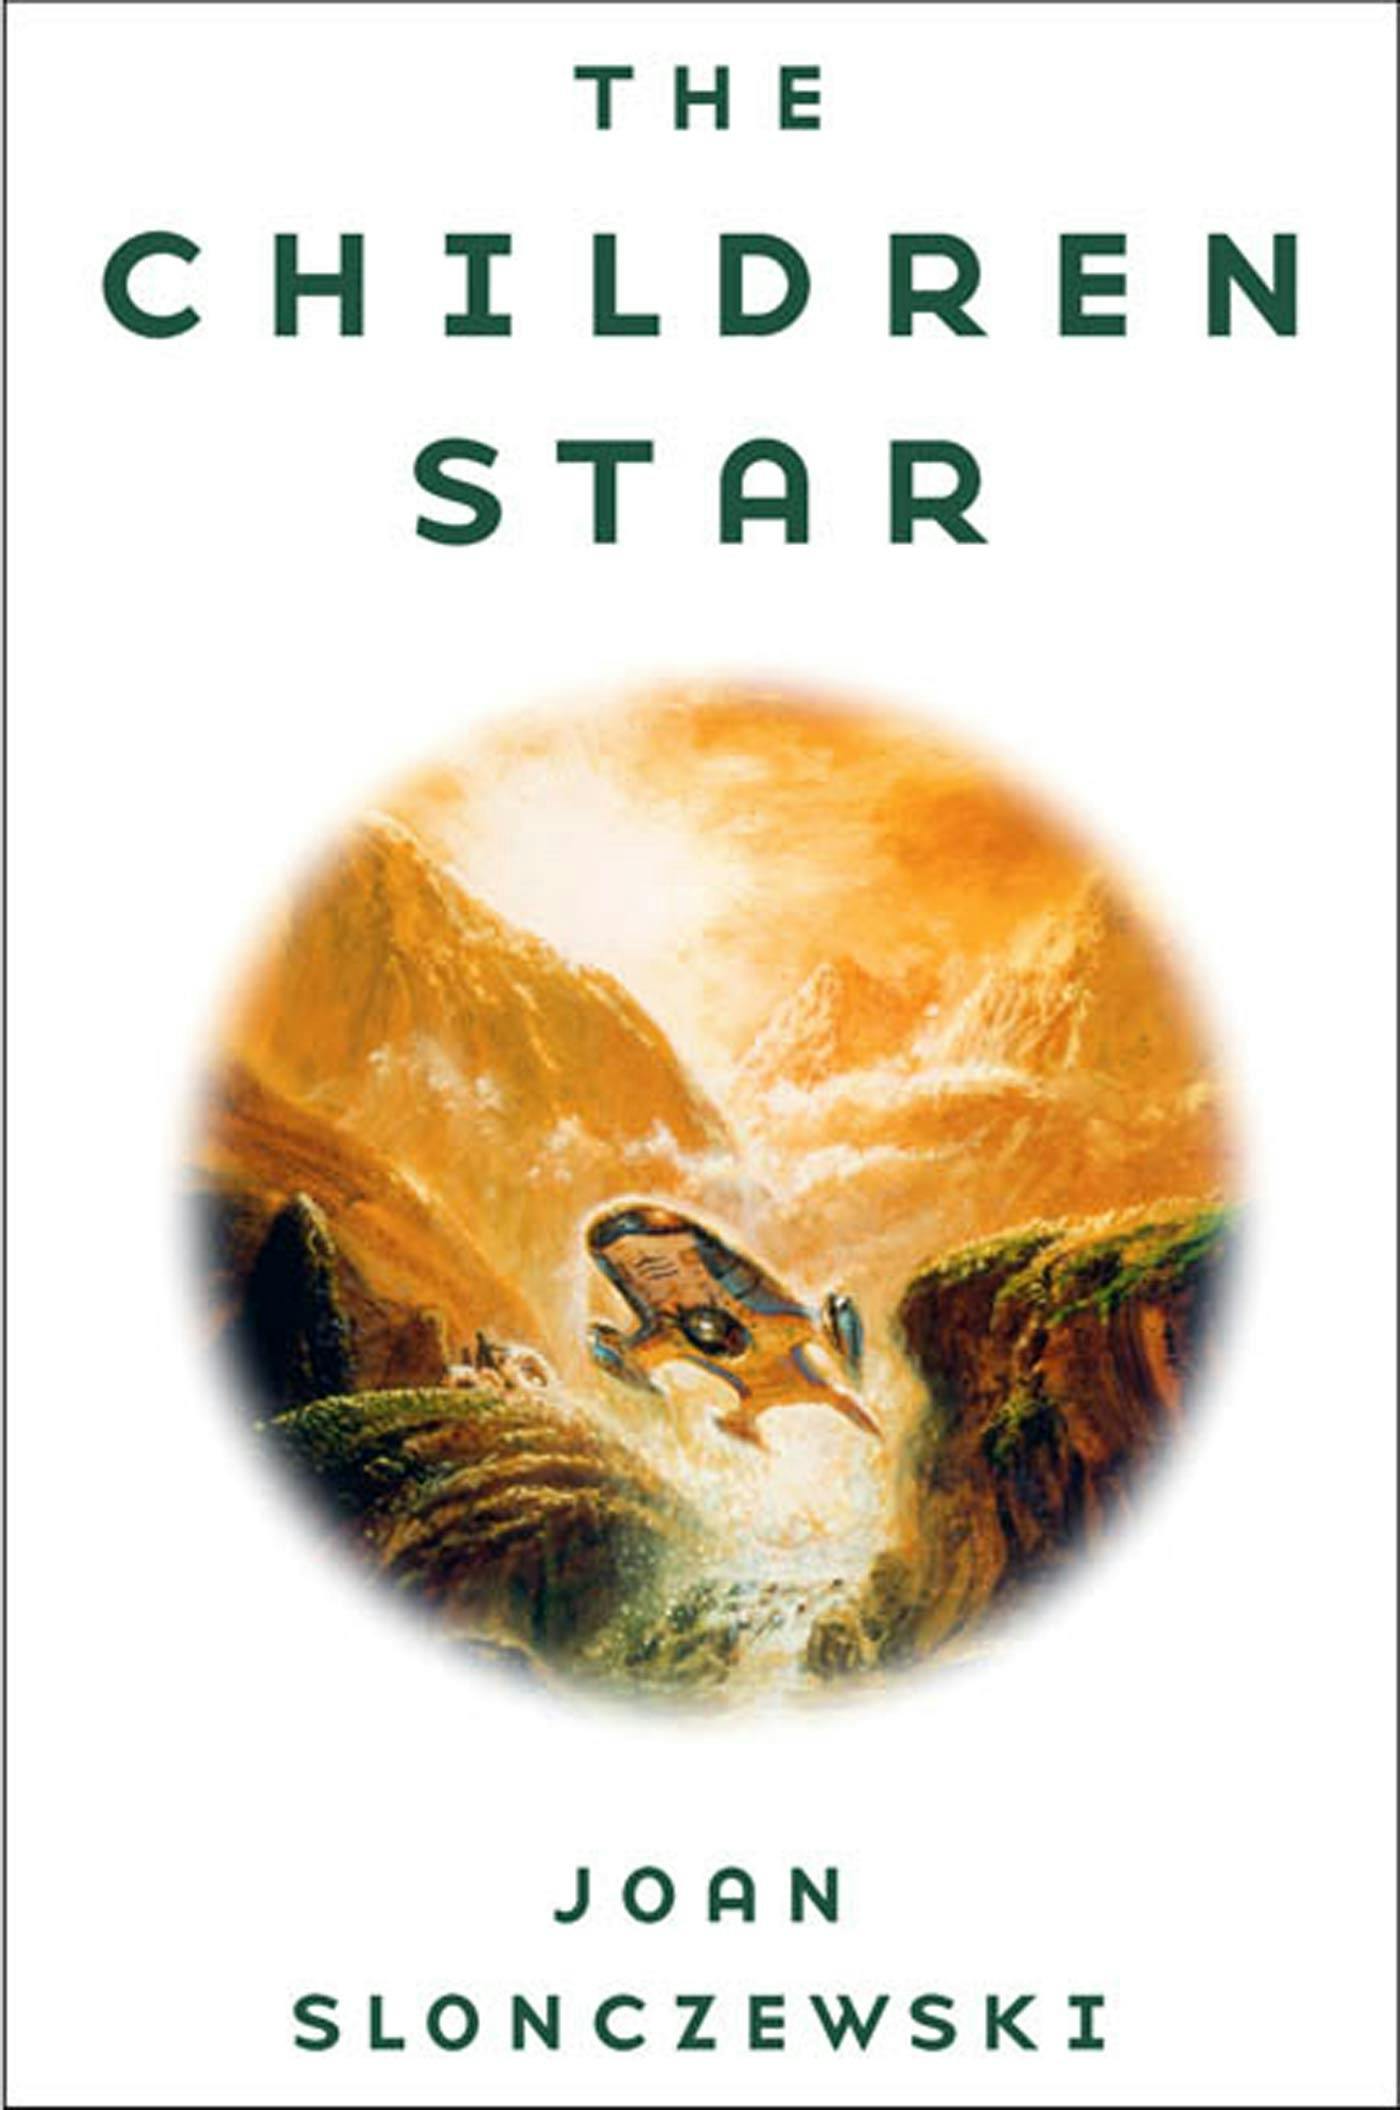 Cover for the book titled as: The Children Star